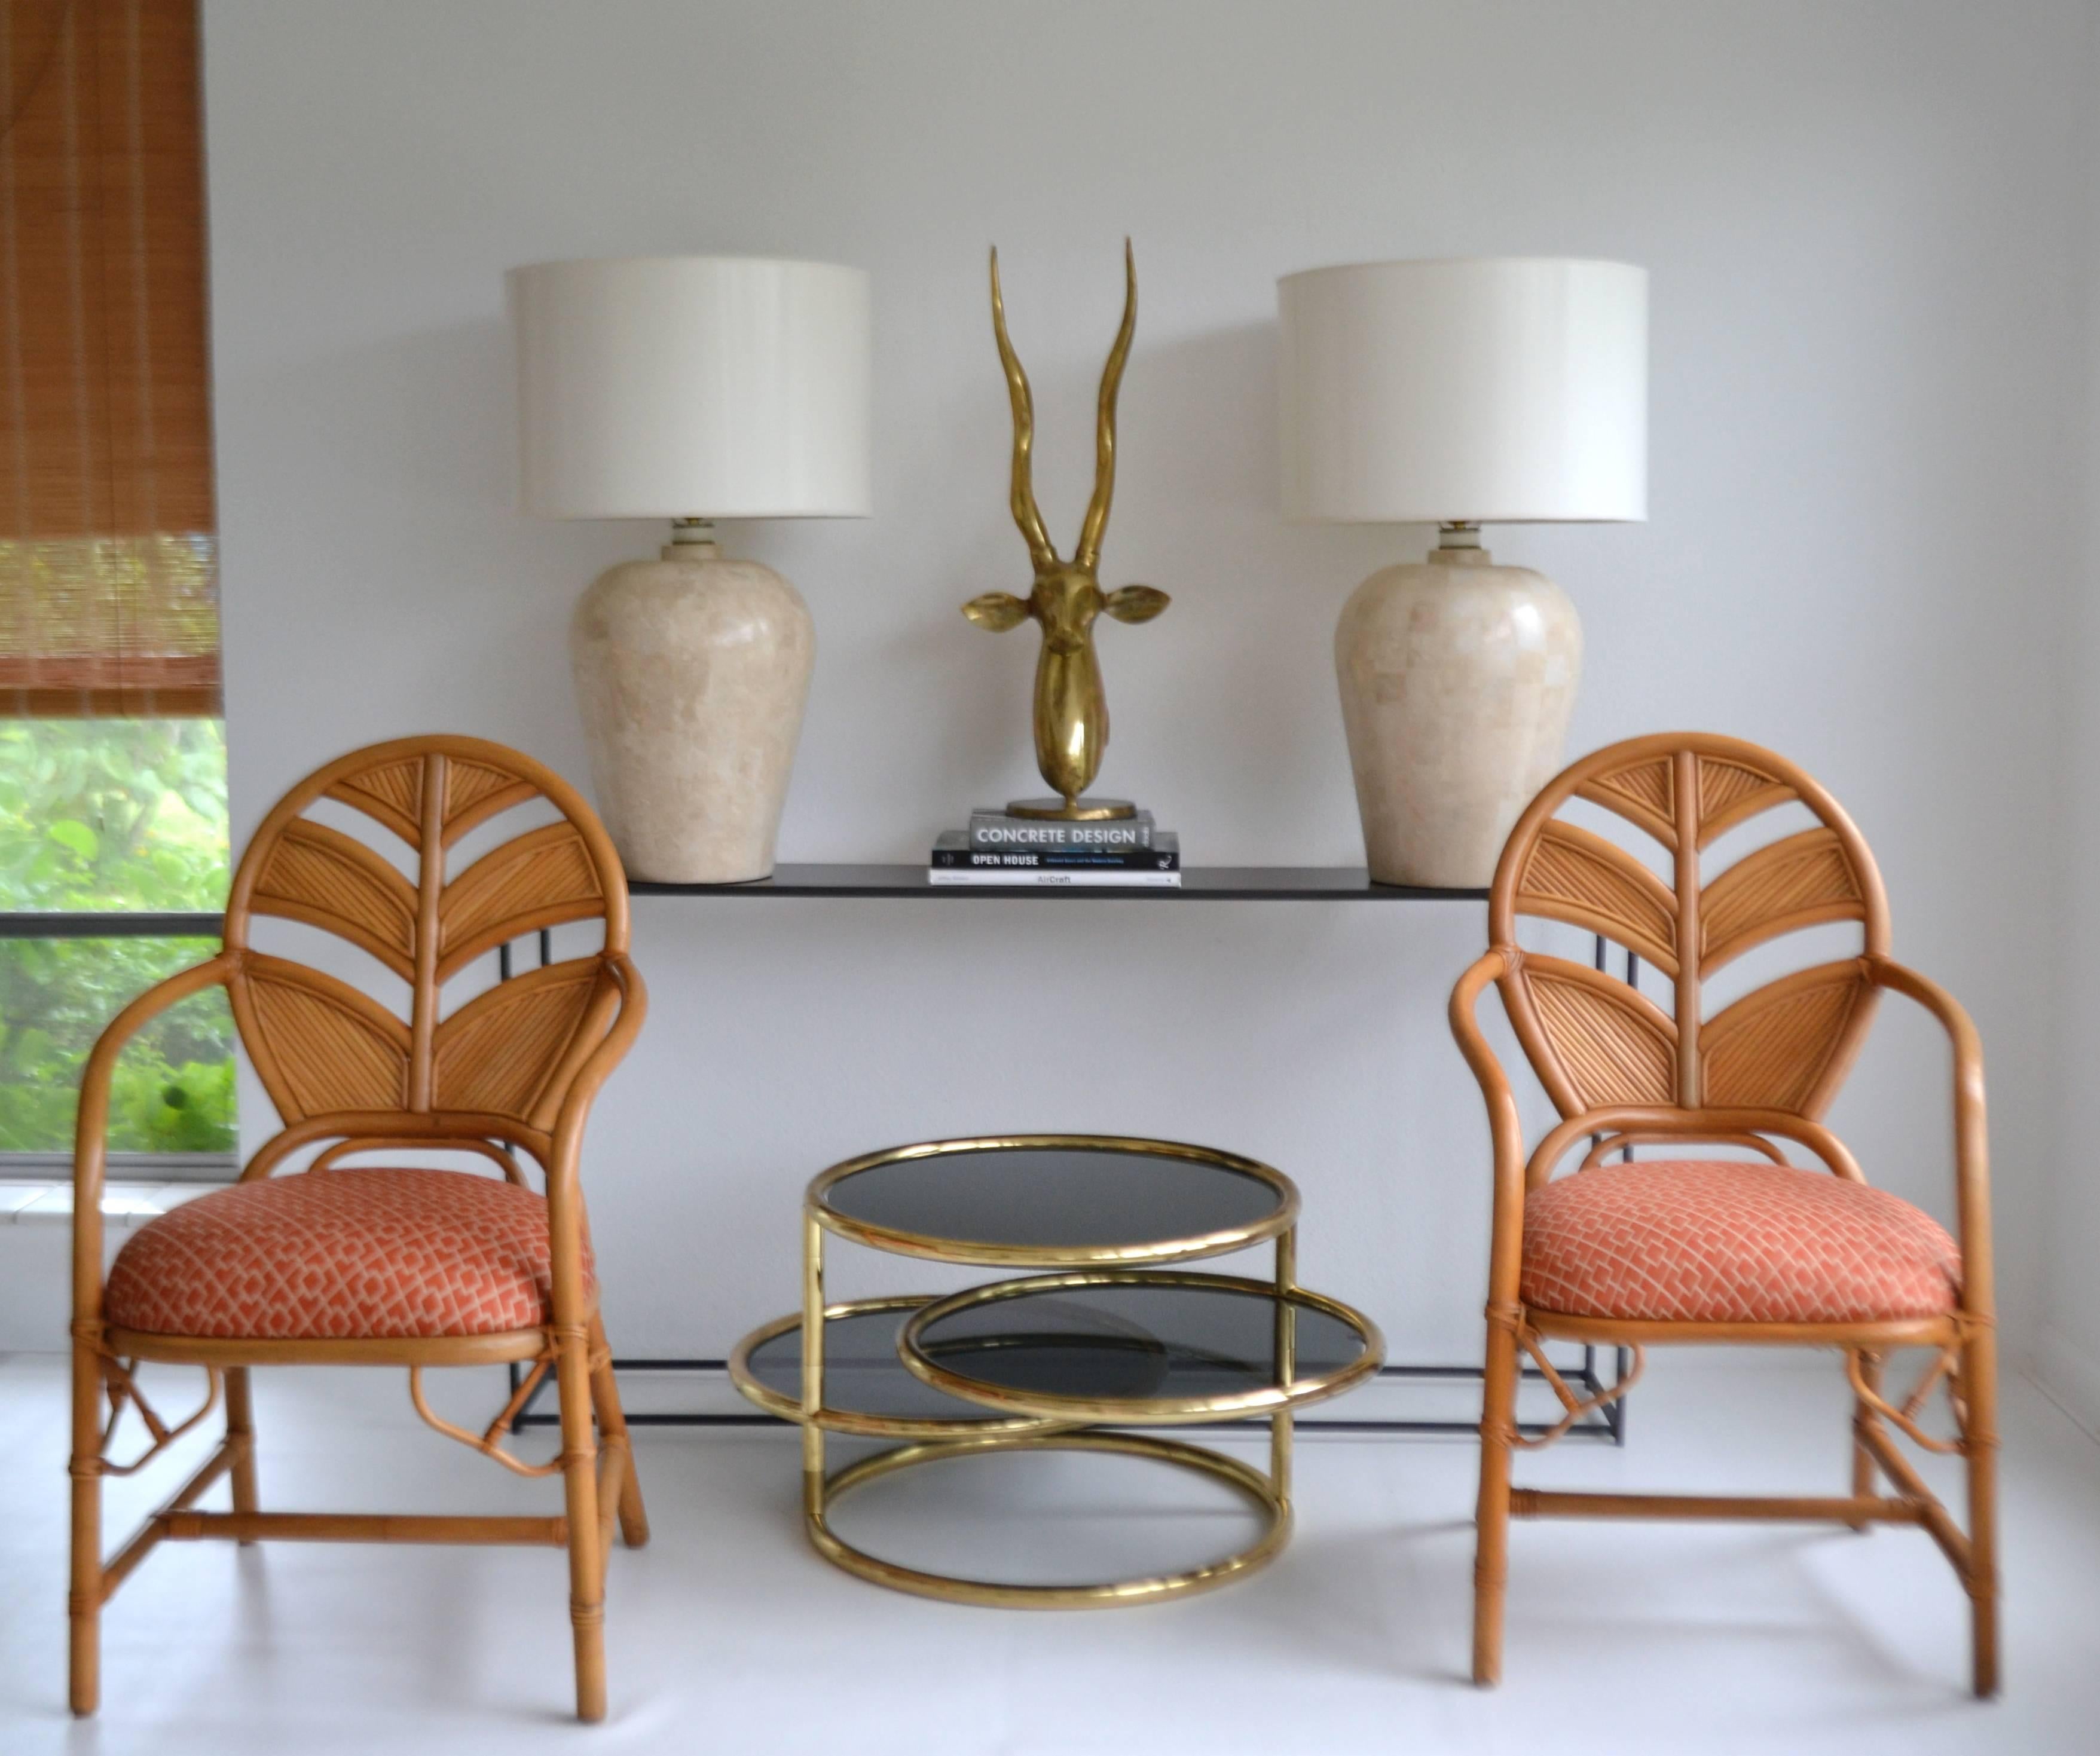 Glamorous Postmodern tessellated stone table lamps, circa 1970s-1980s. These striking lamps are designed of tessellated marble and wired with brass fittings.
Shades not included.
Measurements:
Overall: 30